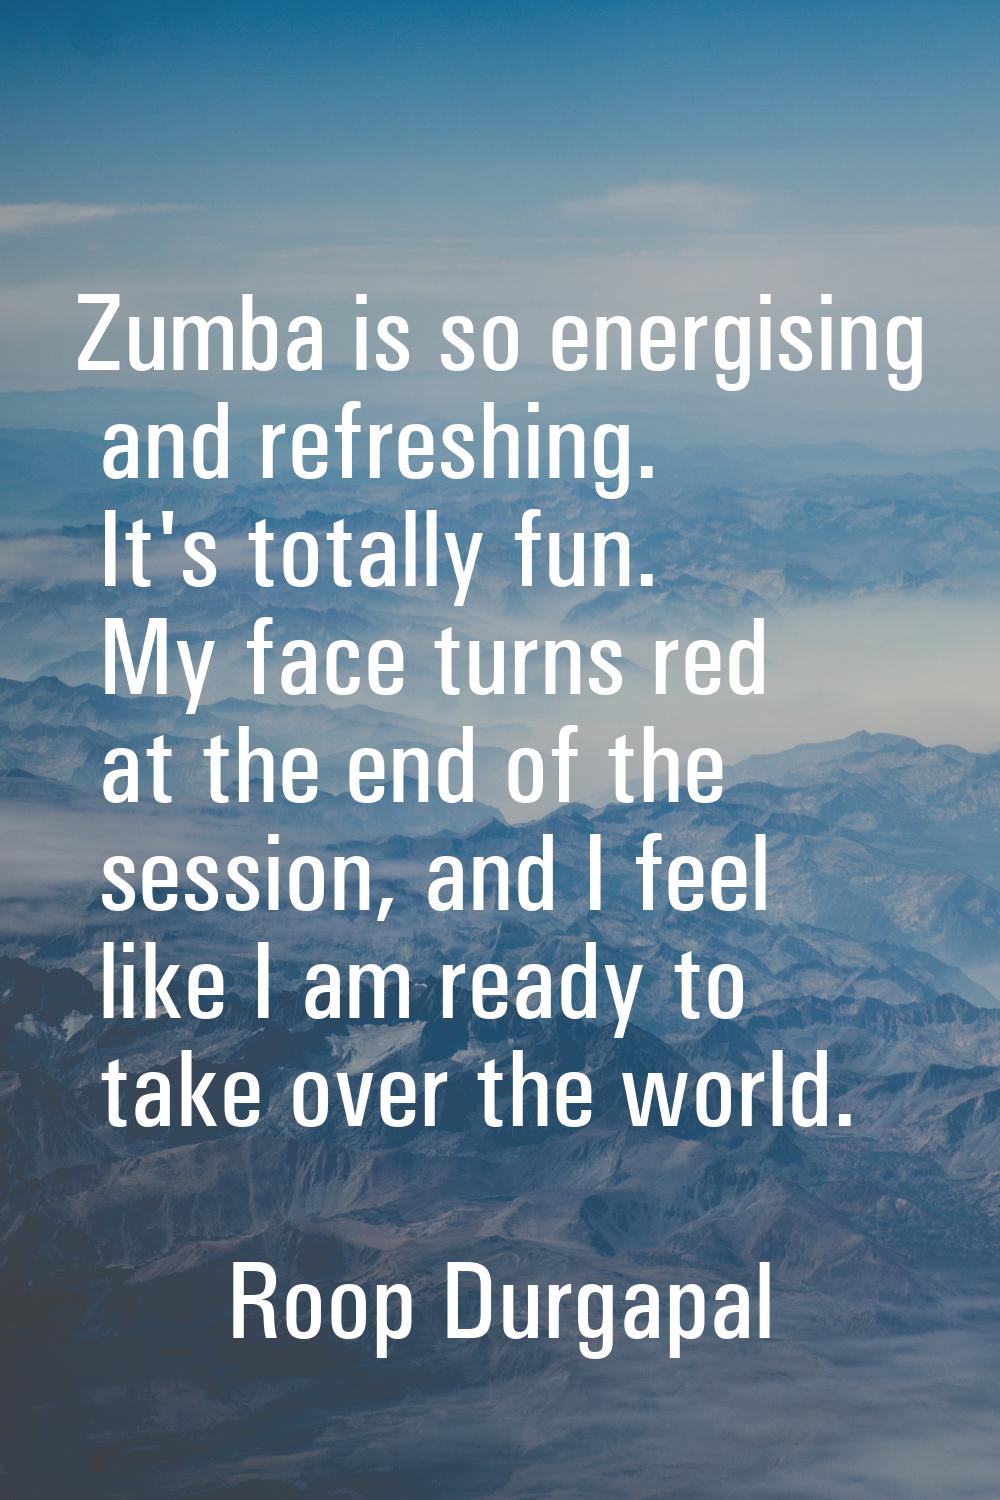 Zumba is so energising and refreshing. It's totally fun. My face turns red at the end of the sessio